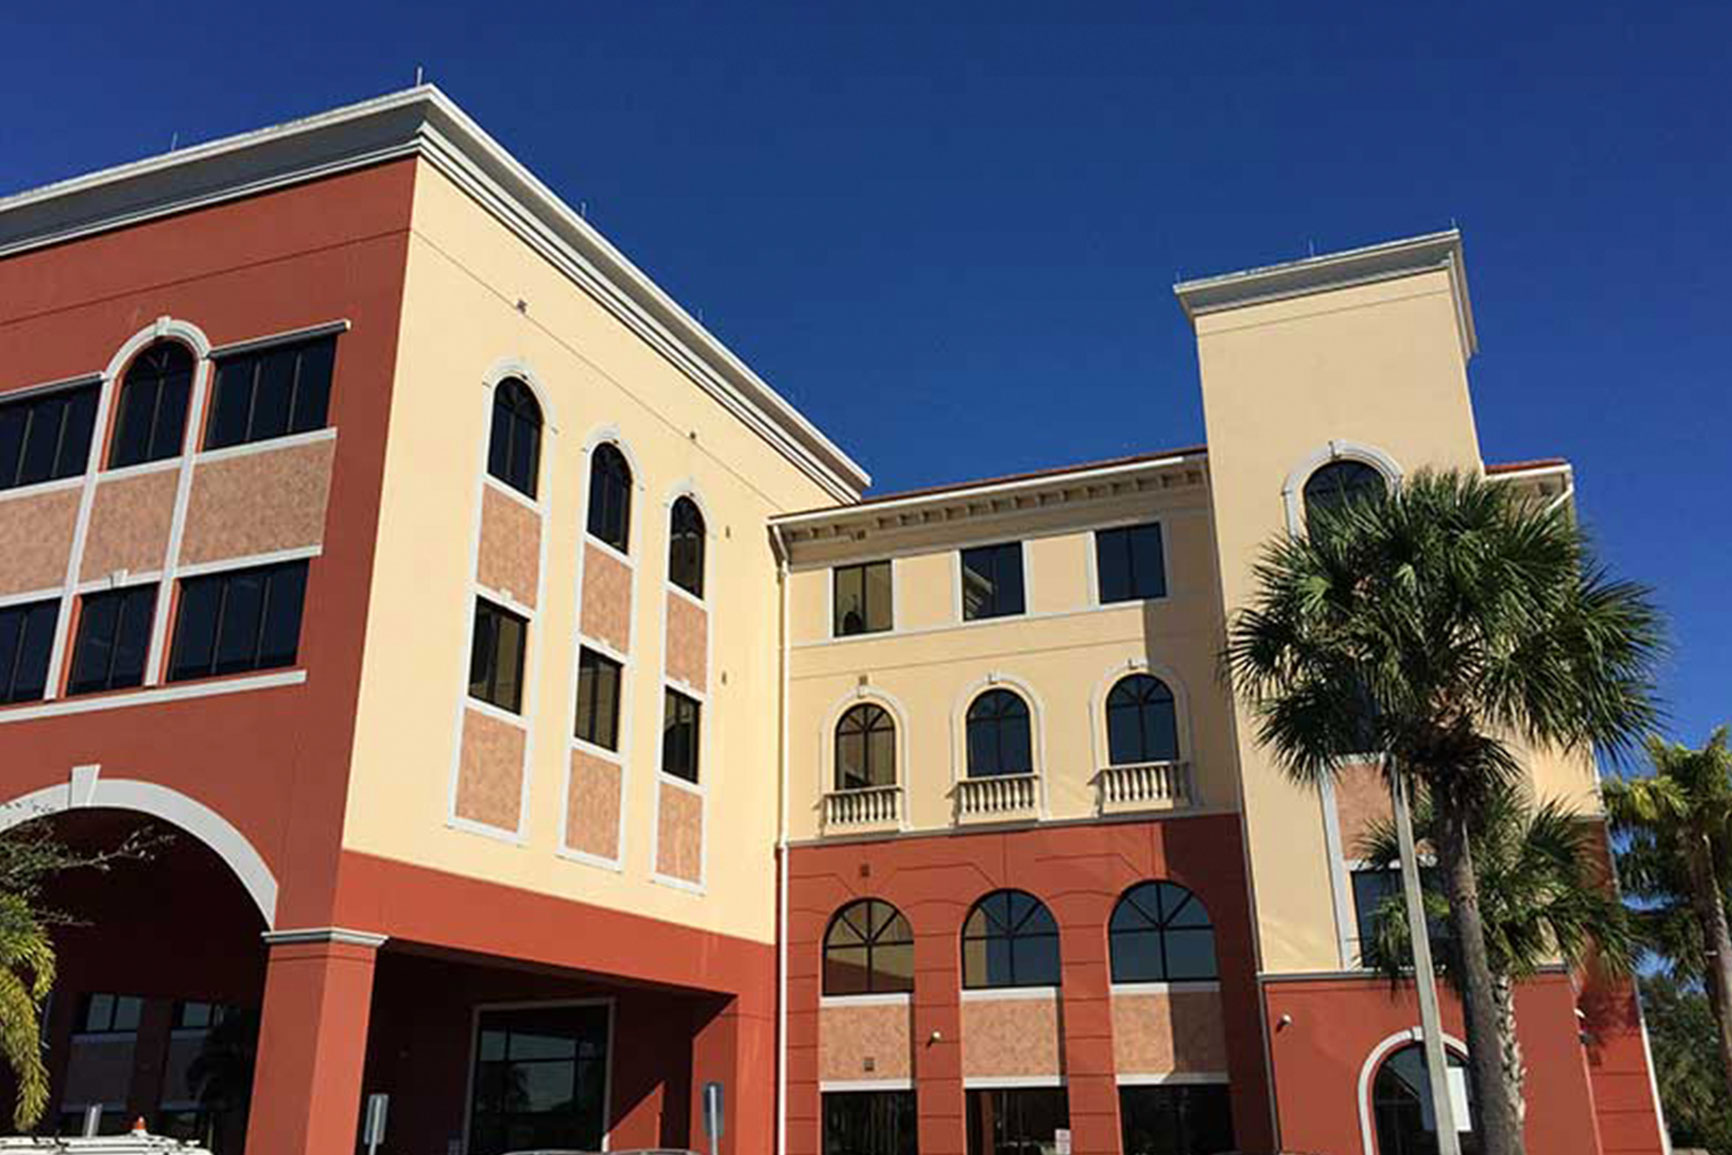 Retail building with tinted windows in Southwest Florida